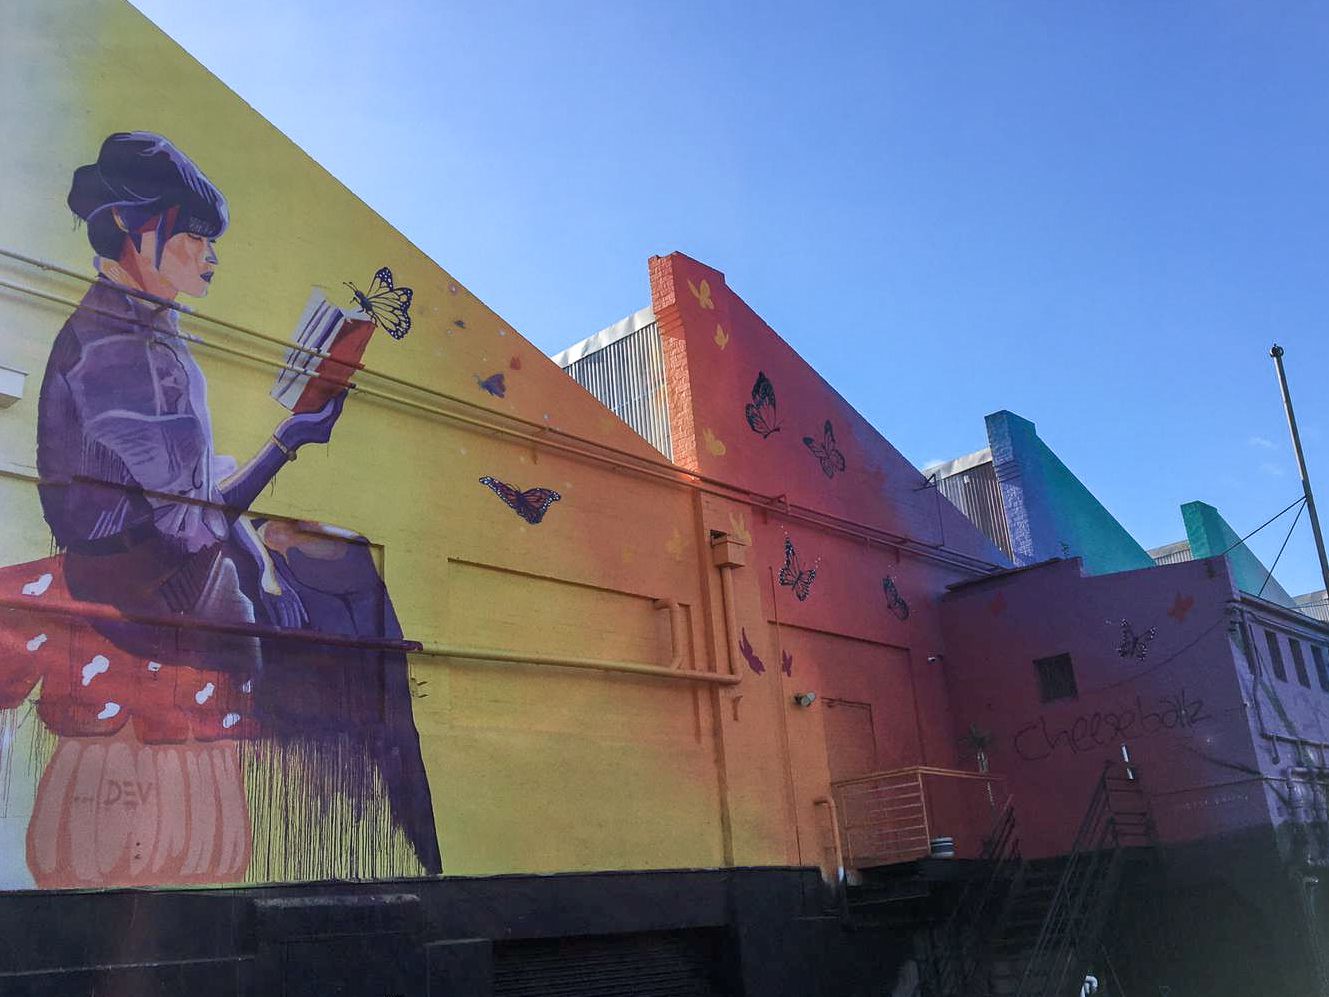 Exterior photo of building with street art of a women dressed in purple sitting on a red and white mushroom reading a book with a yellow butterfly. The wall turns gradually turns from yellow through the rainbow.